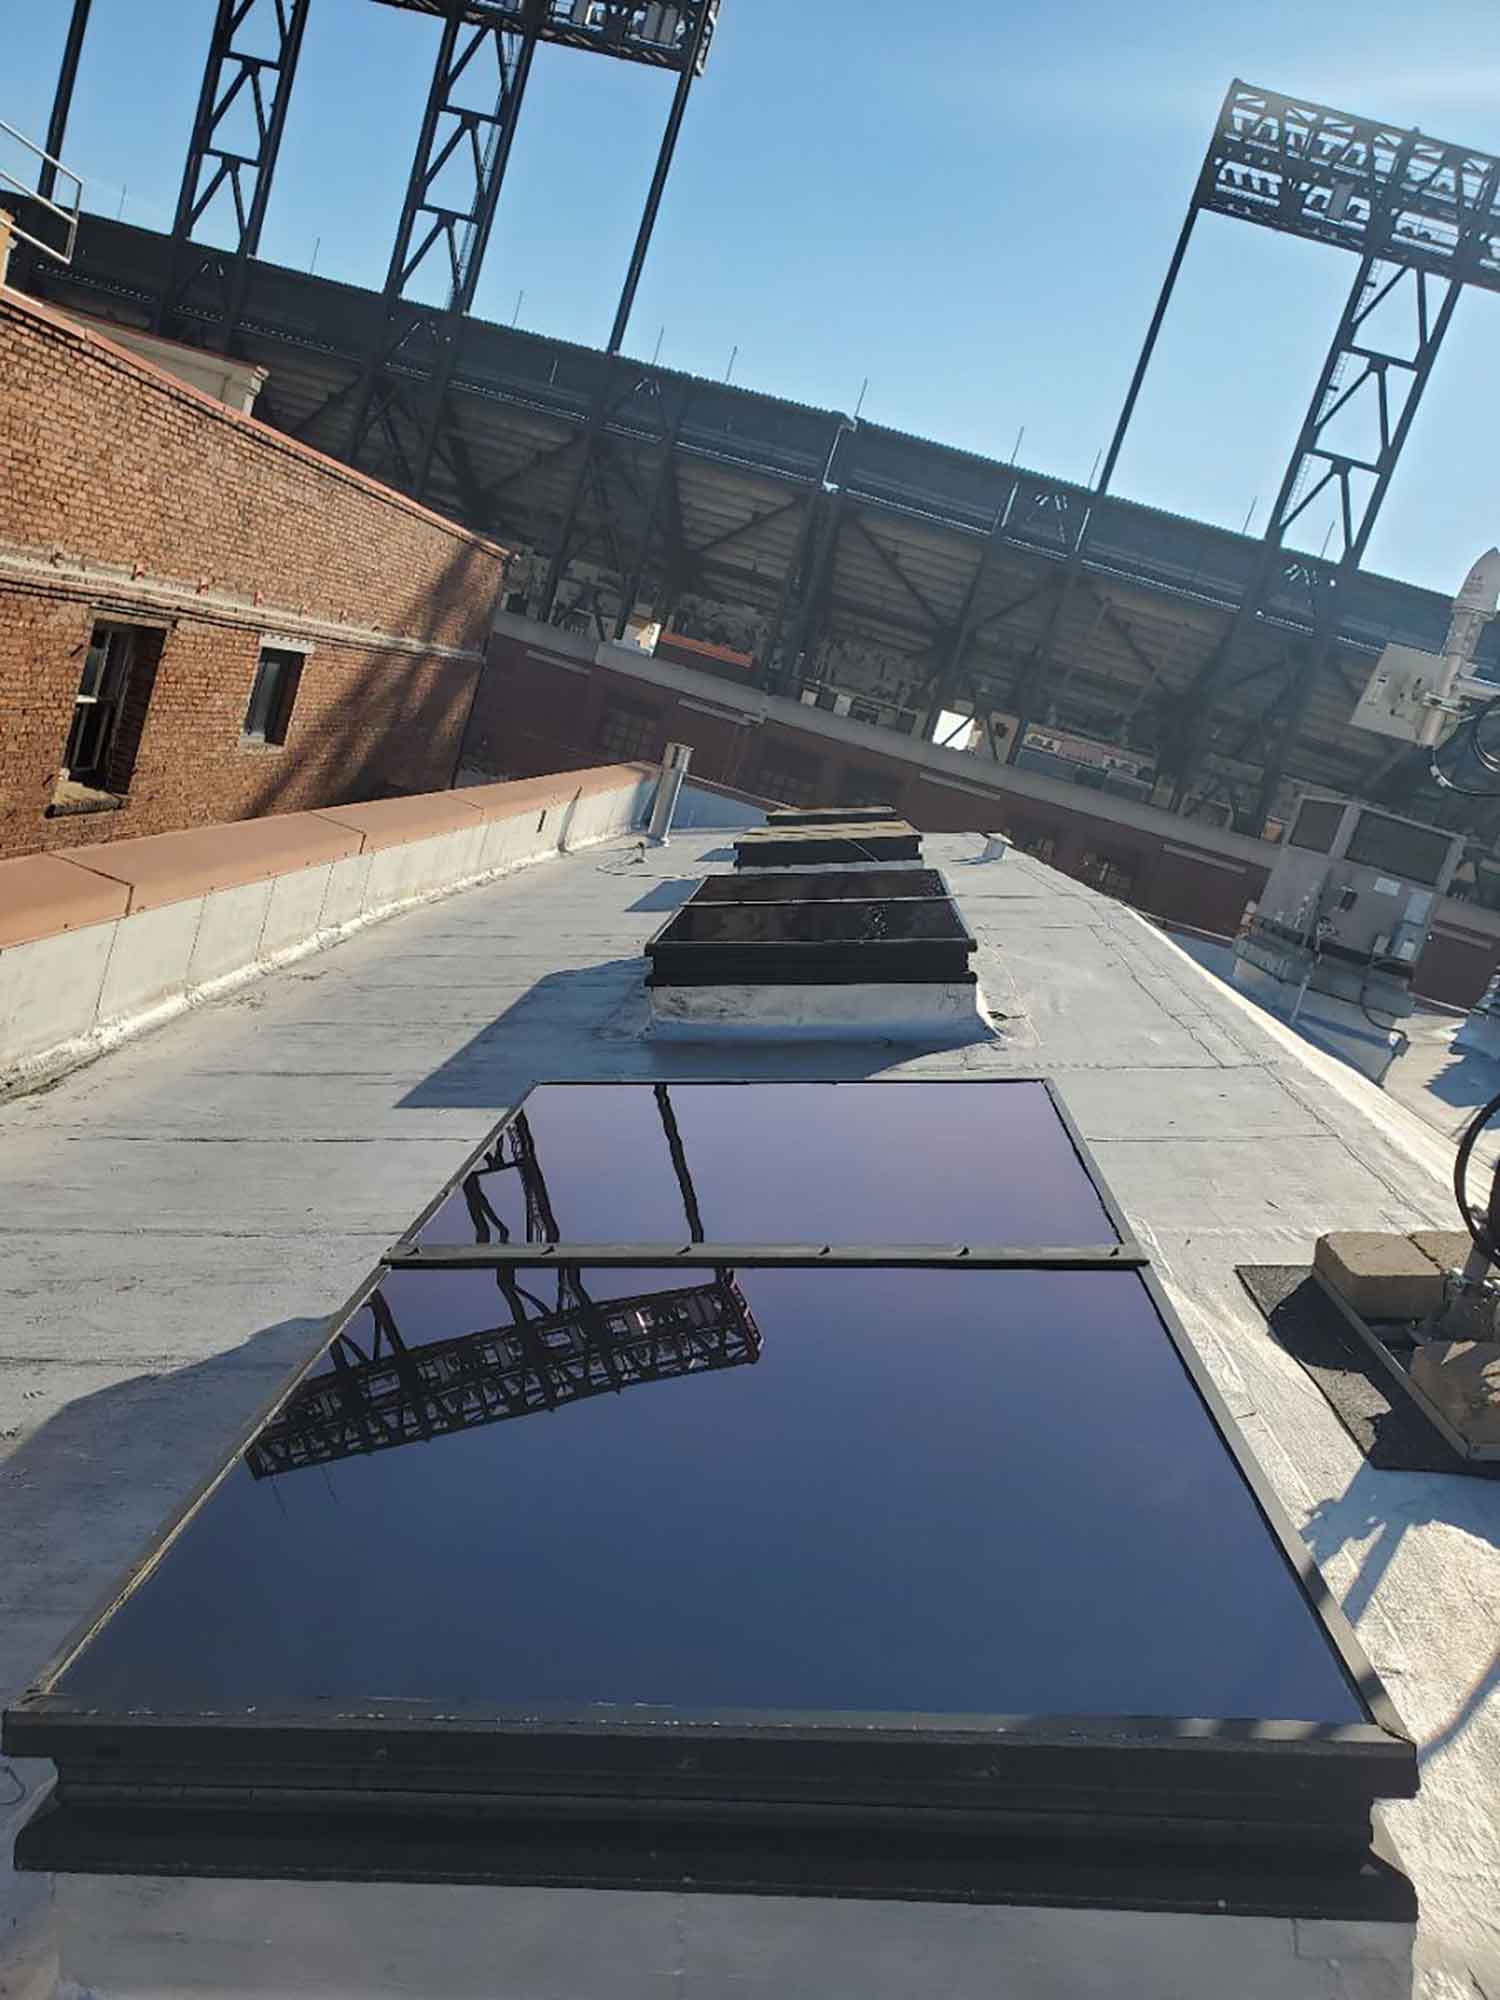 ClimatePro installed 3M Exterior window tint on these skylights in San Francisco.